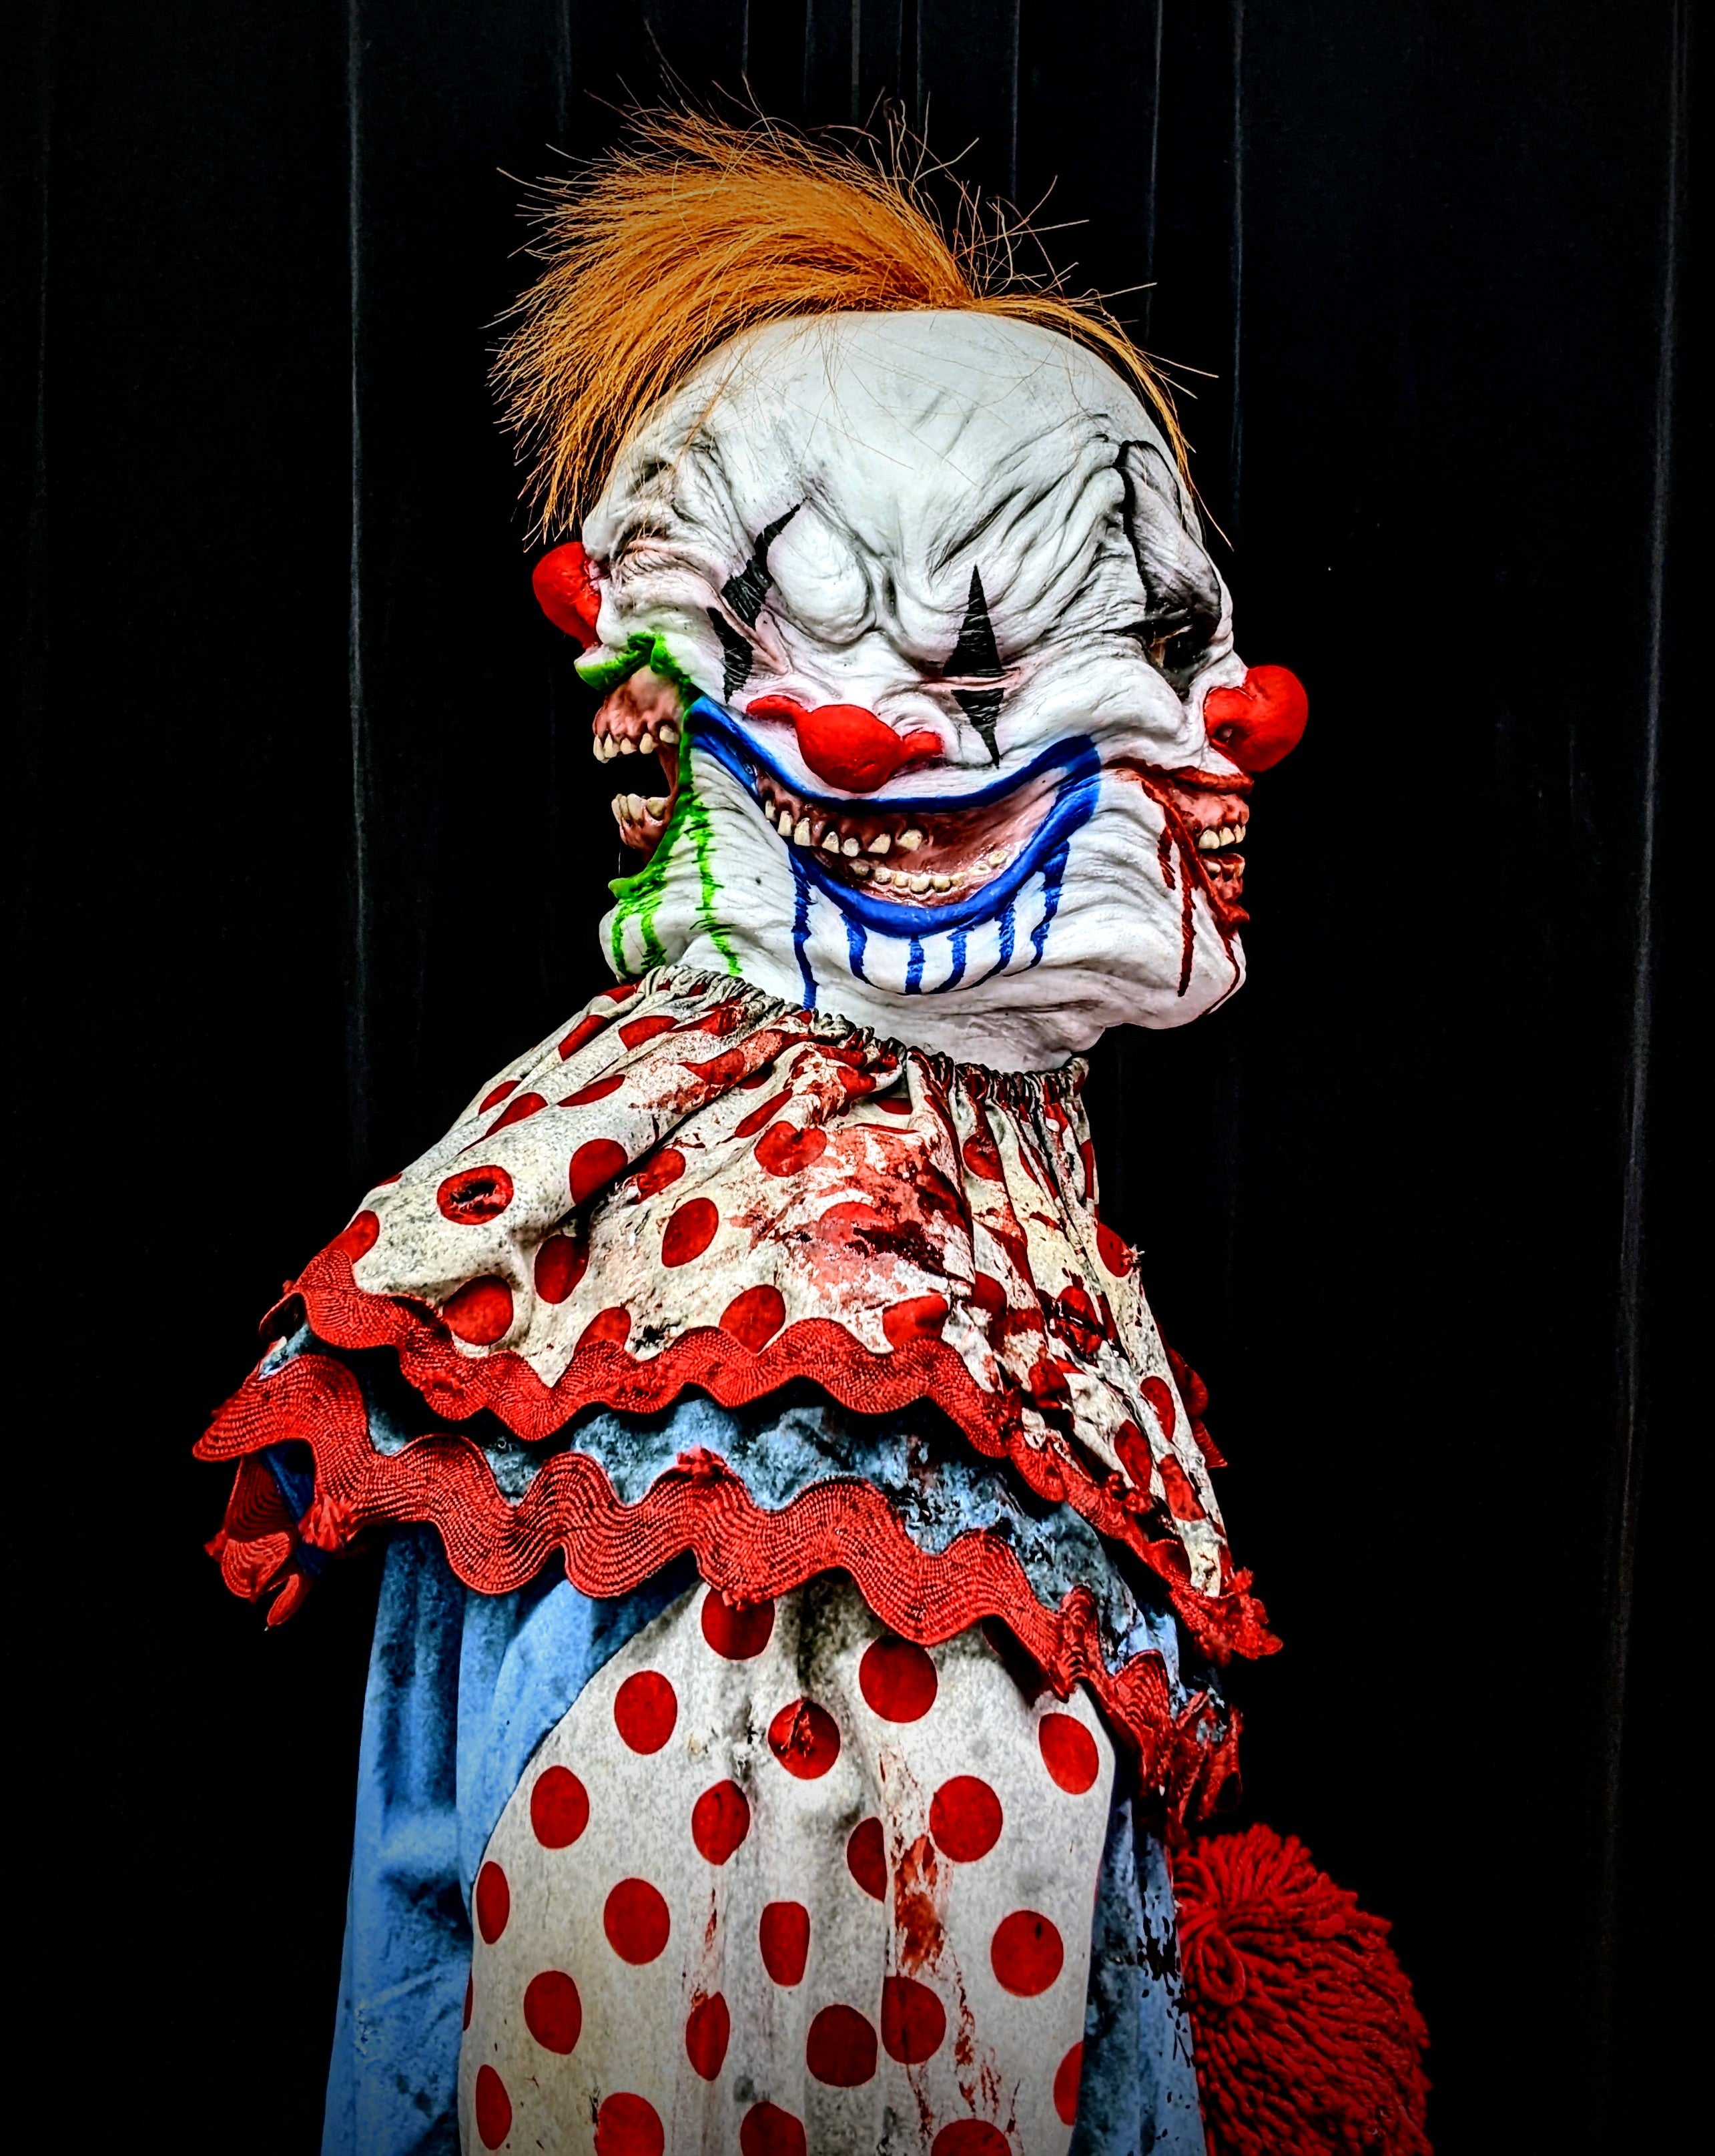 4-Banger -Silicone Clown Mask with Hair